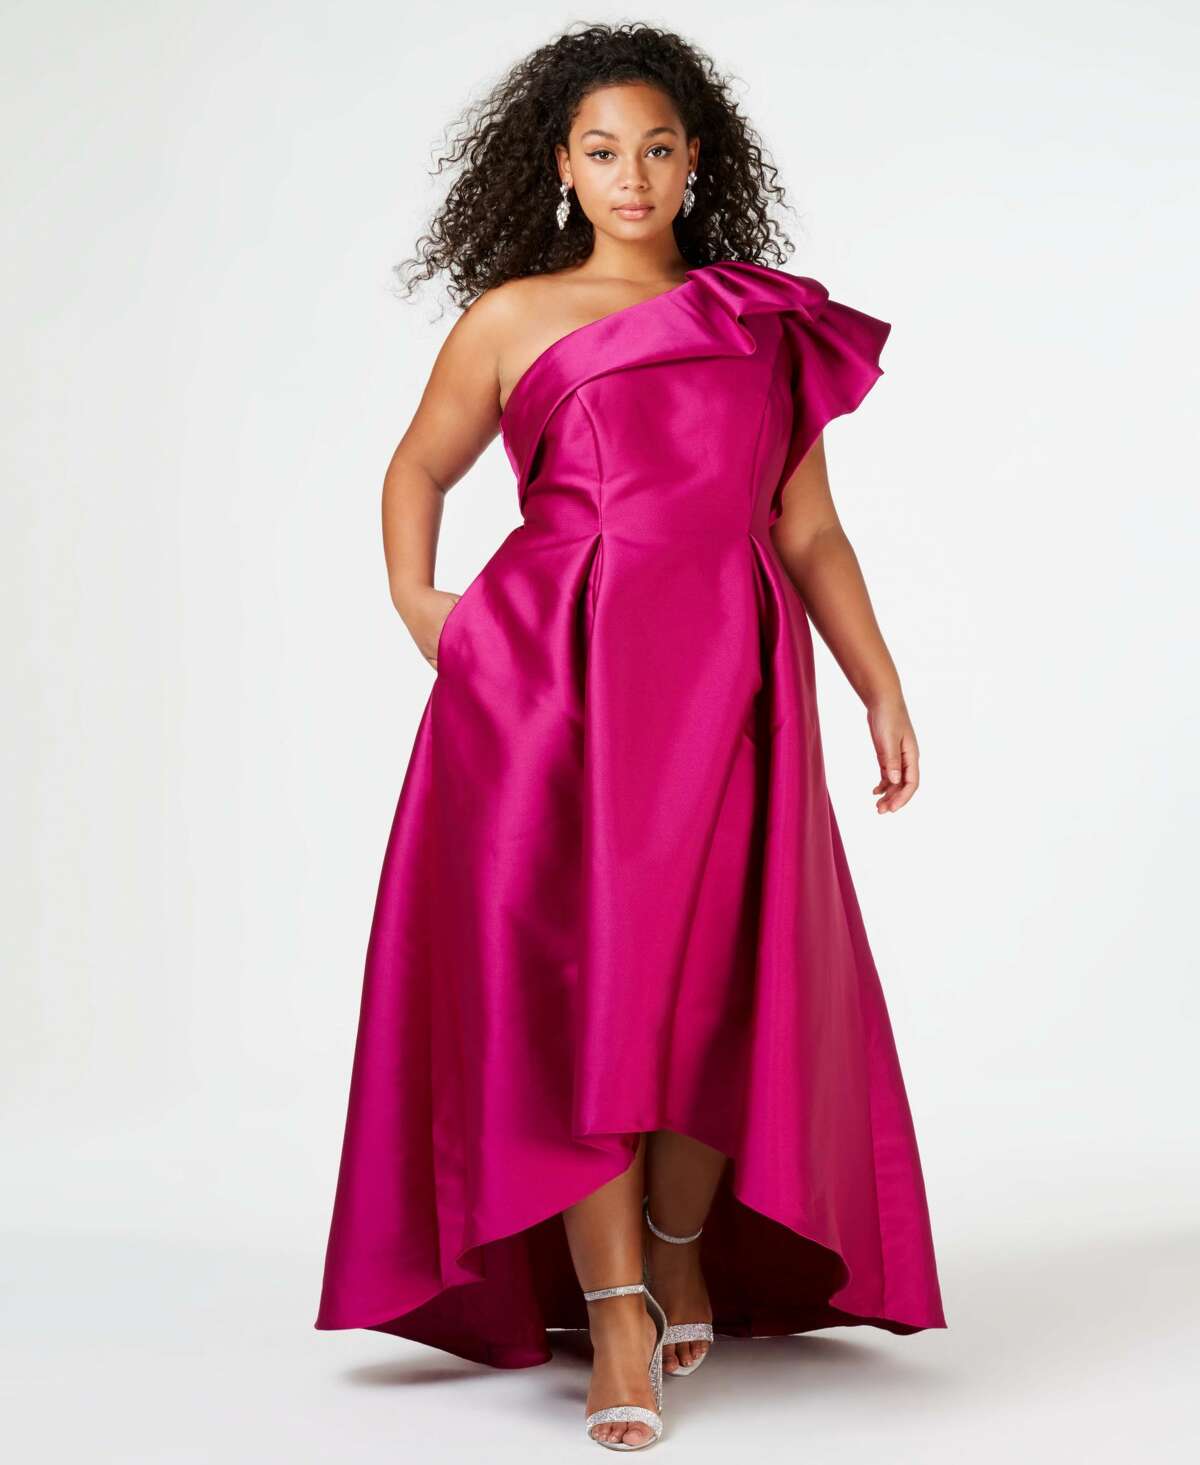 Adrianna Papell Plus Size One-Shoulder Gown, $279.00 PROM